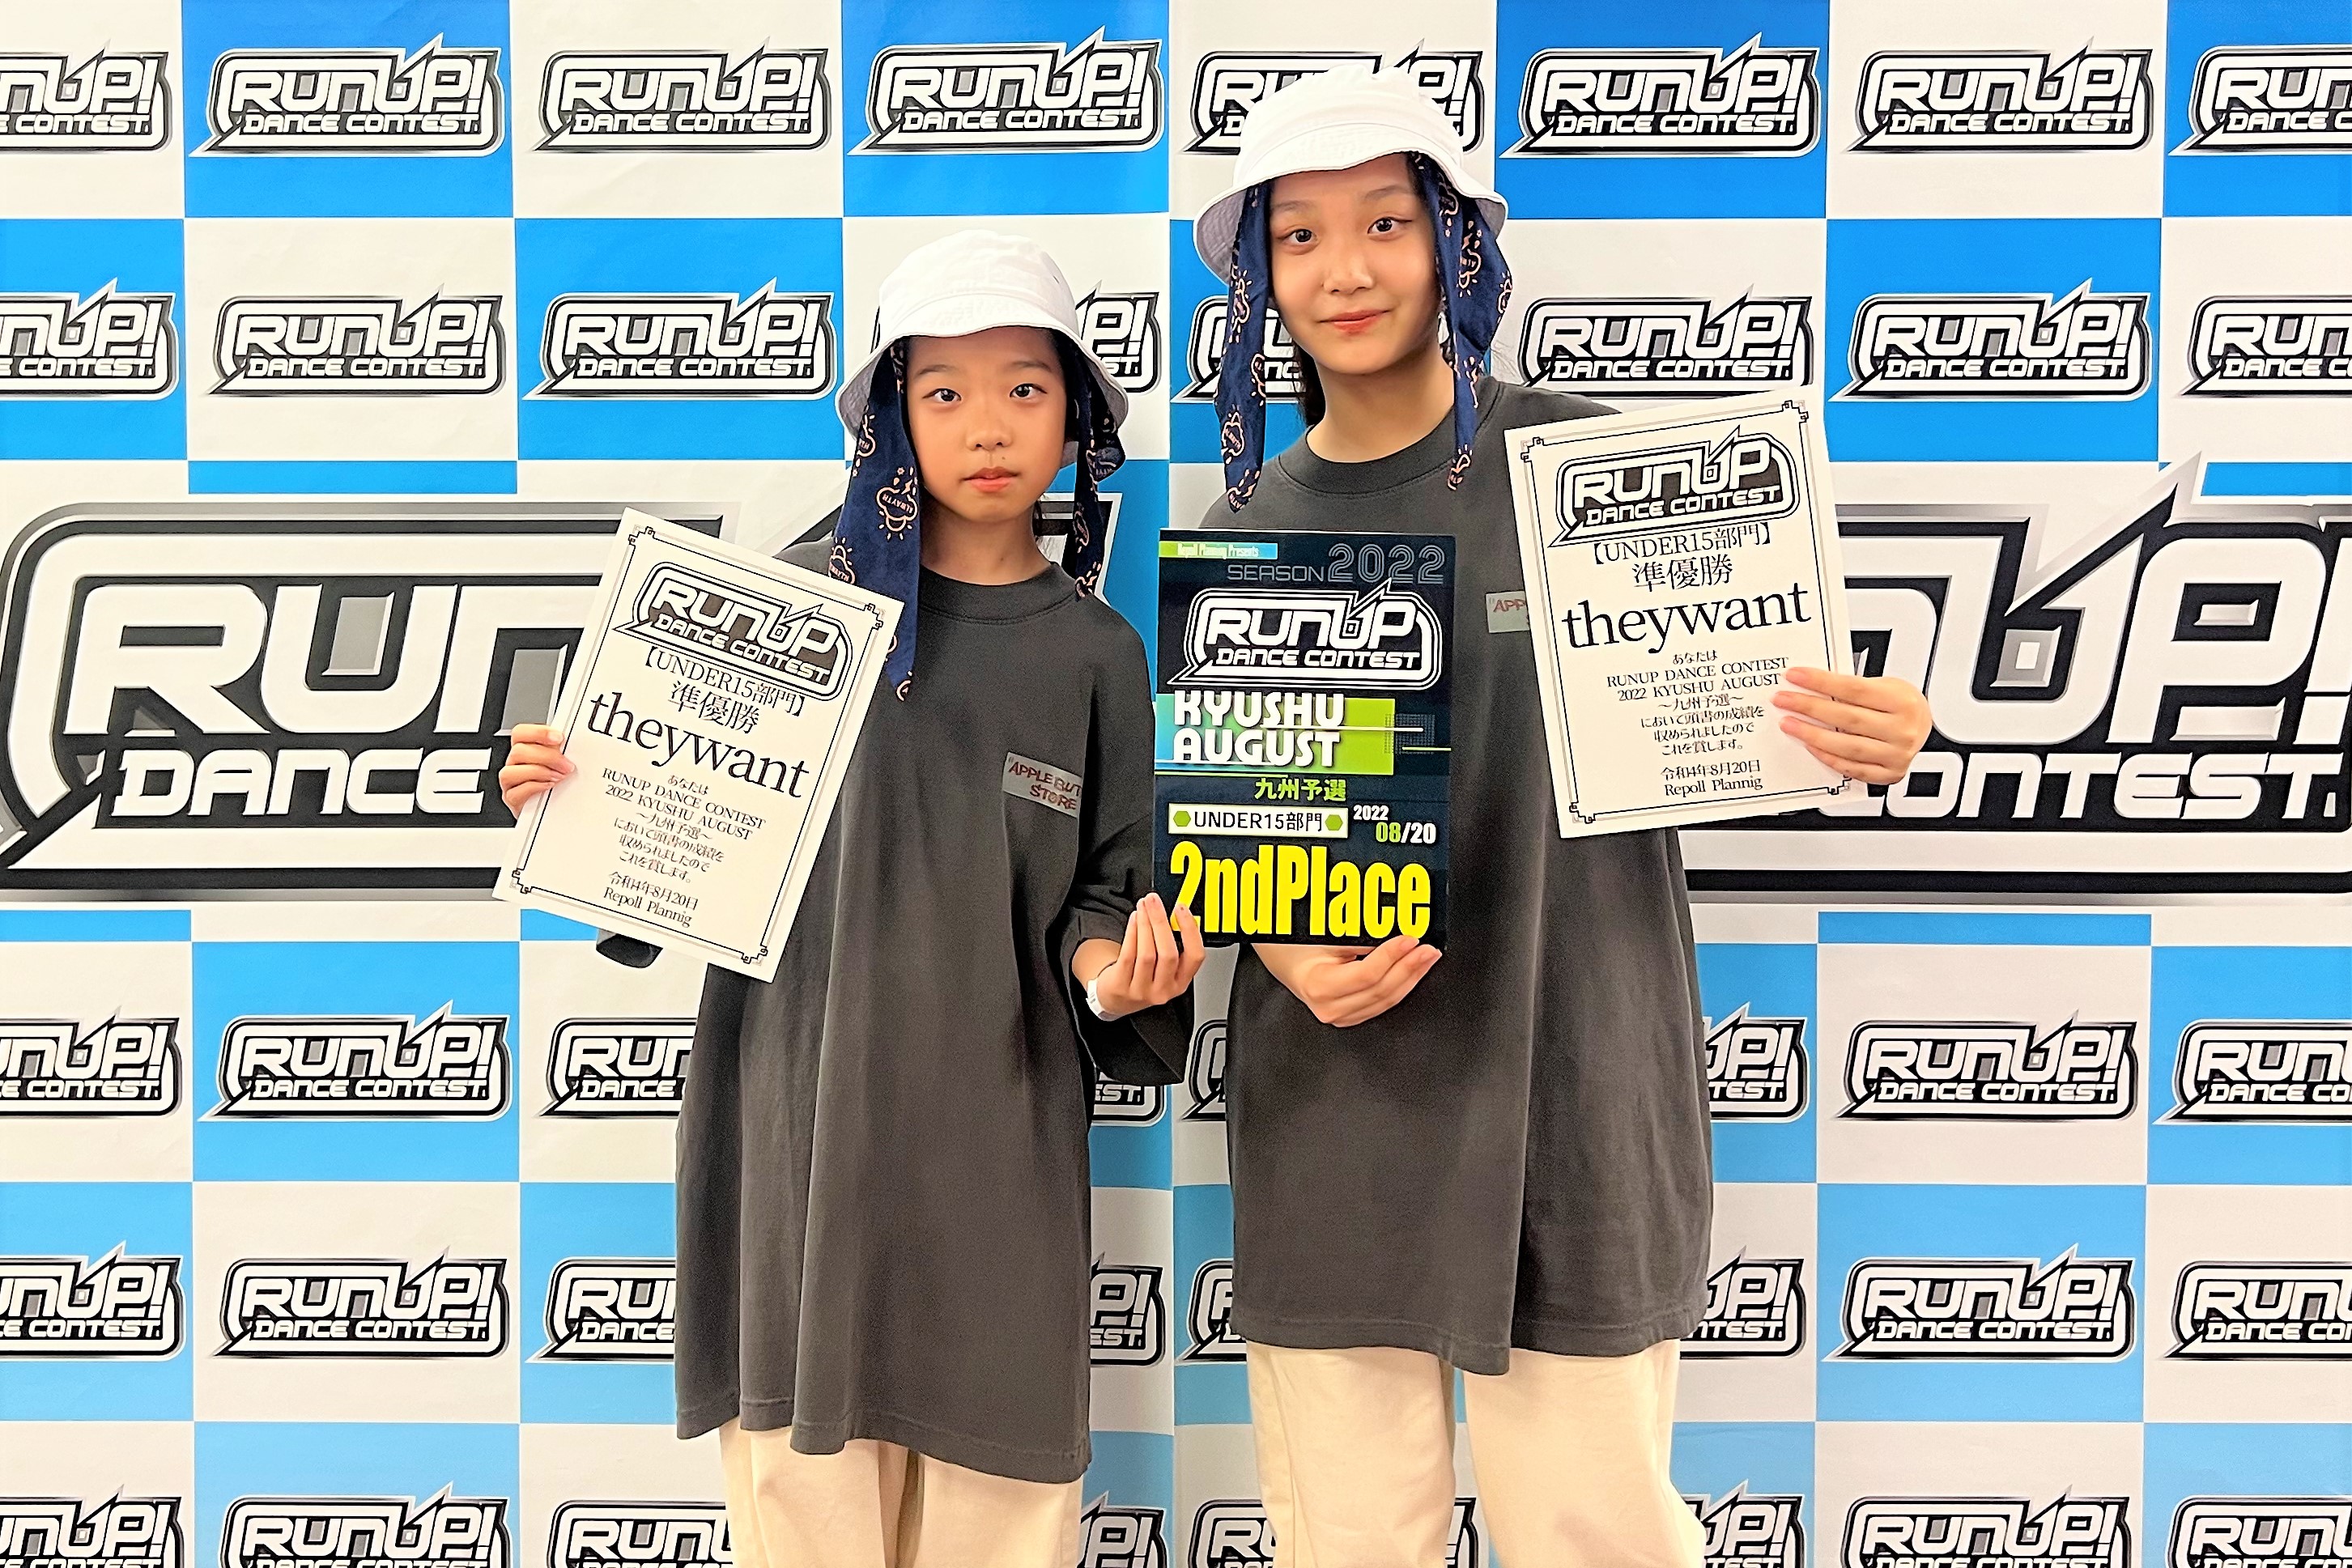 RUNUP 2022 KYUSHU AUGUST UNDER15 準優勝 theywant